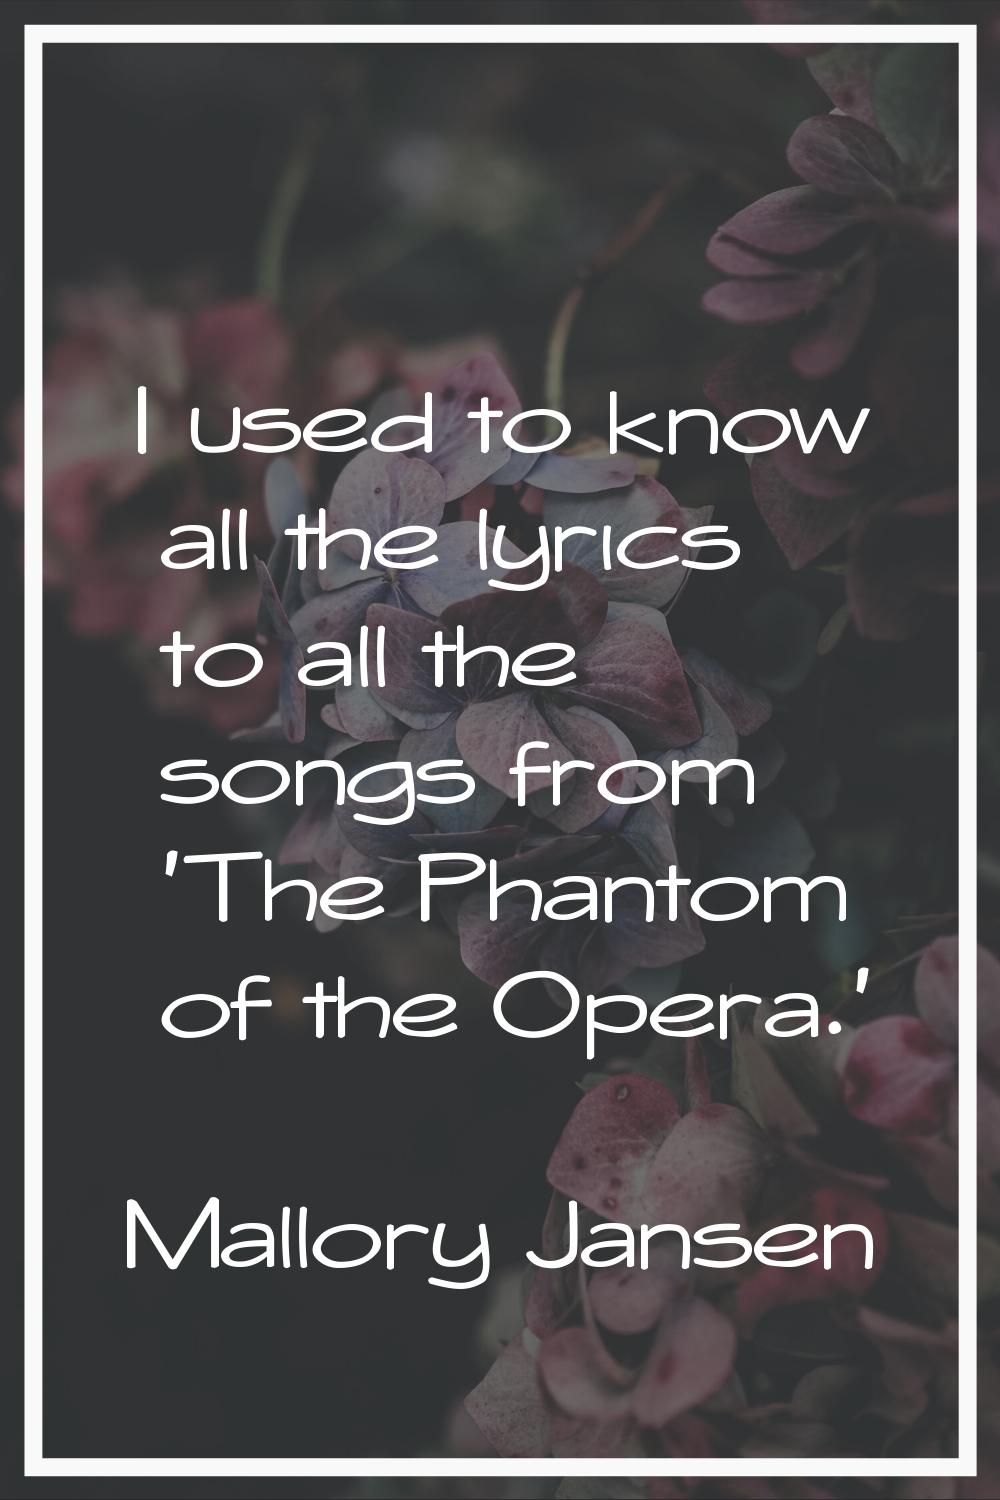 I used to know all the lyrics to all the songs from 'The Phantom of the Opera.'